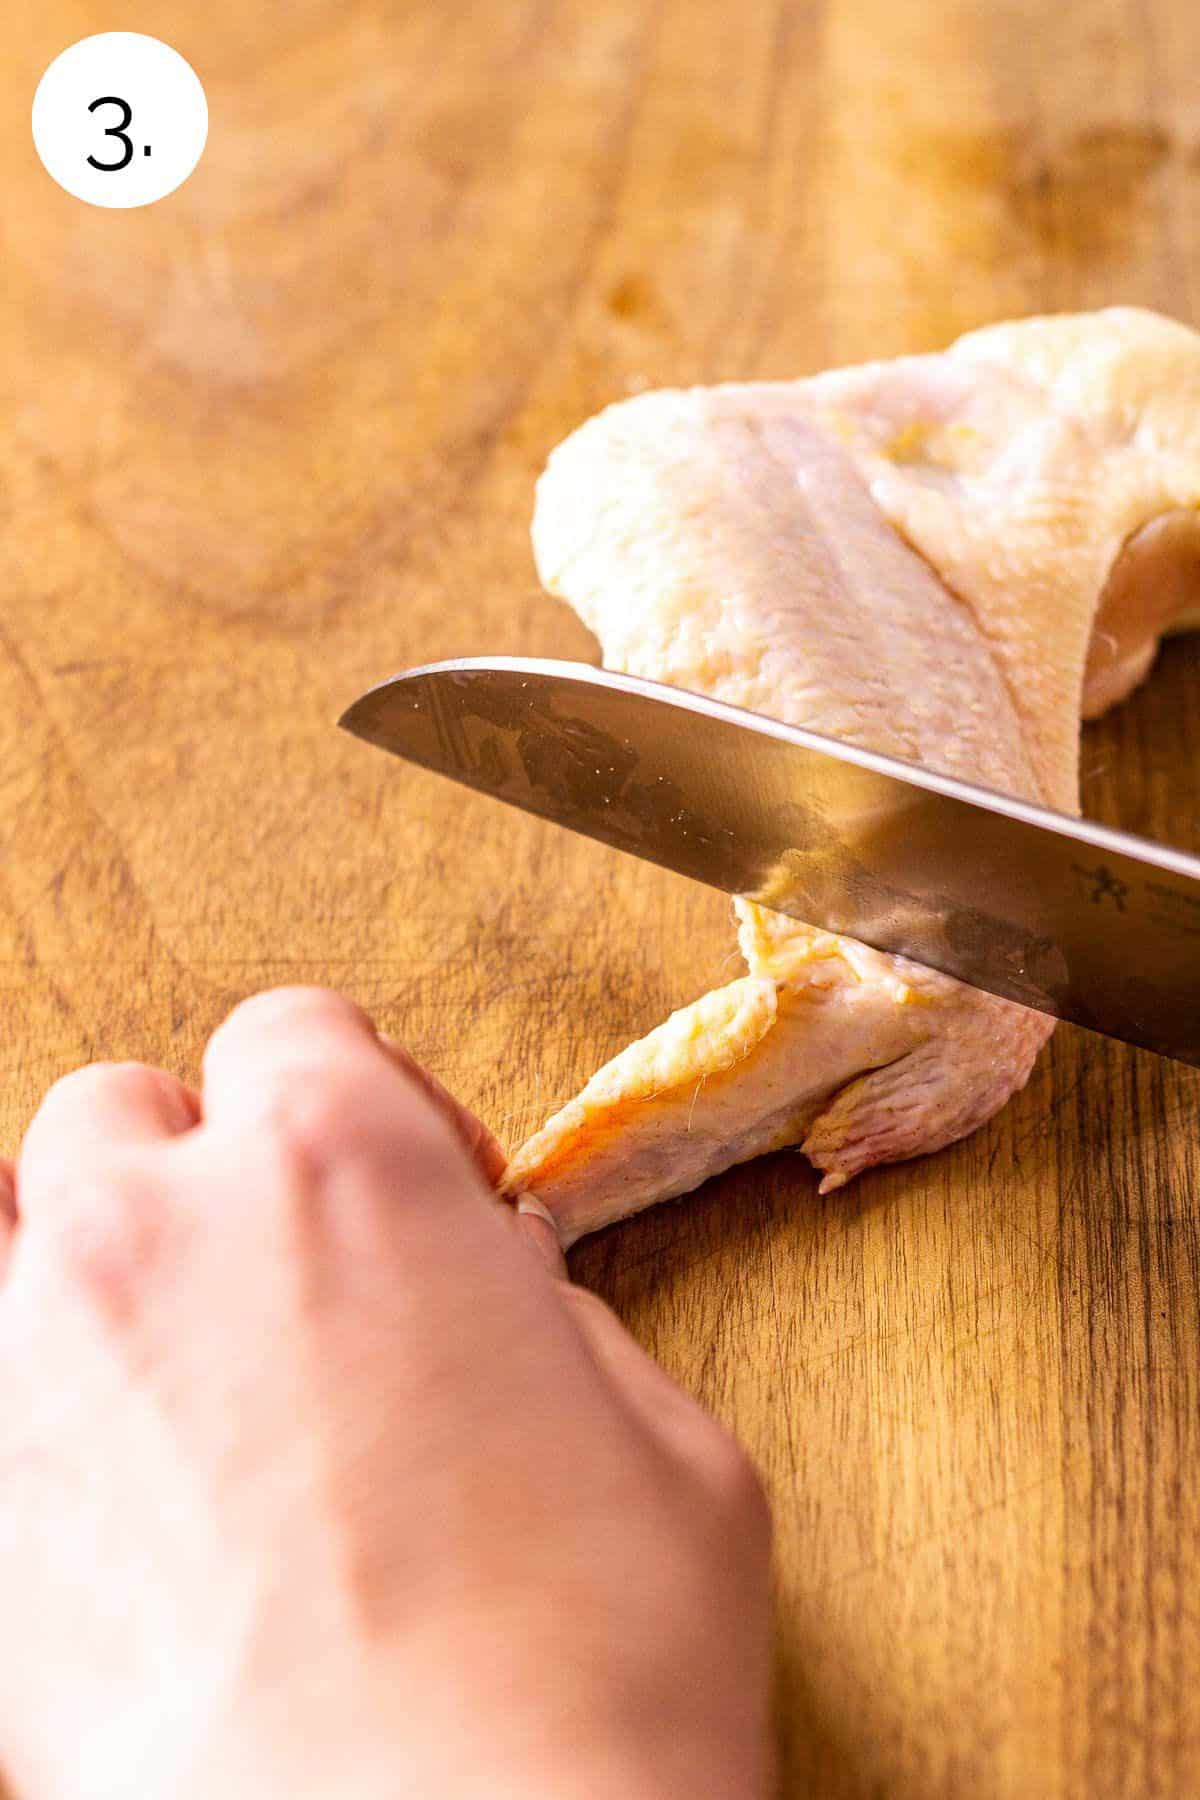 A butcher knife slicing off the wing tip on a brown wooden cutting board.